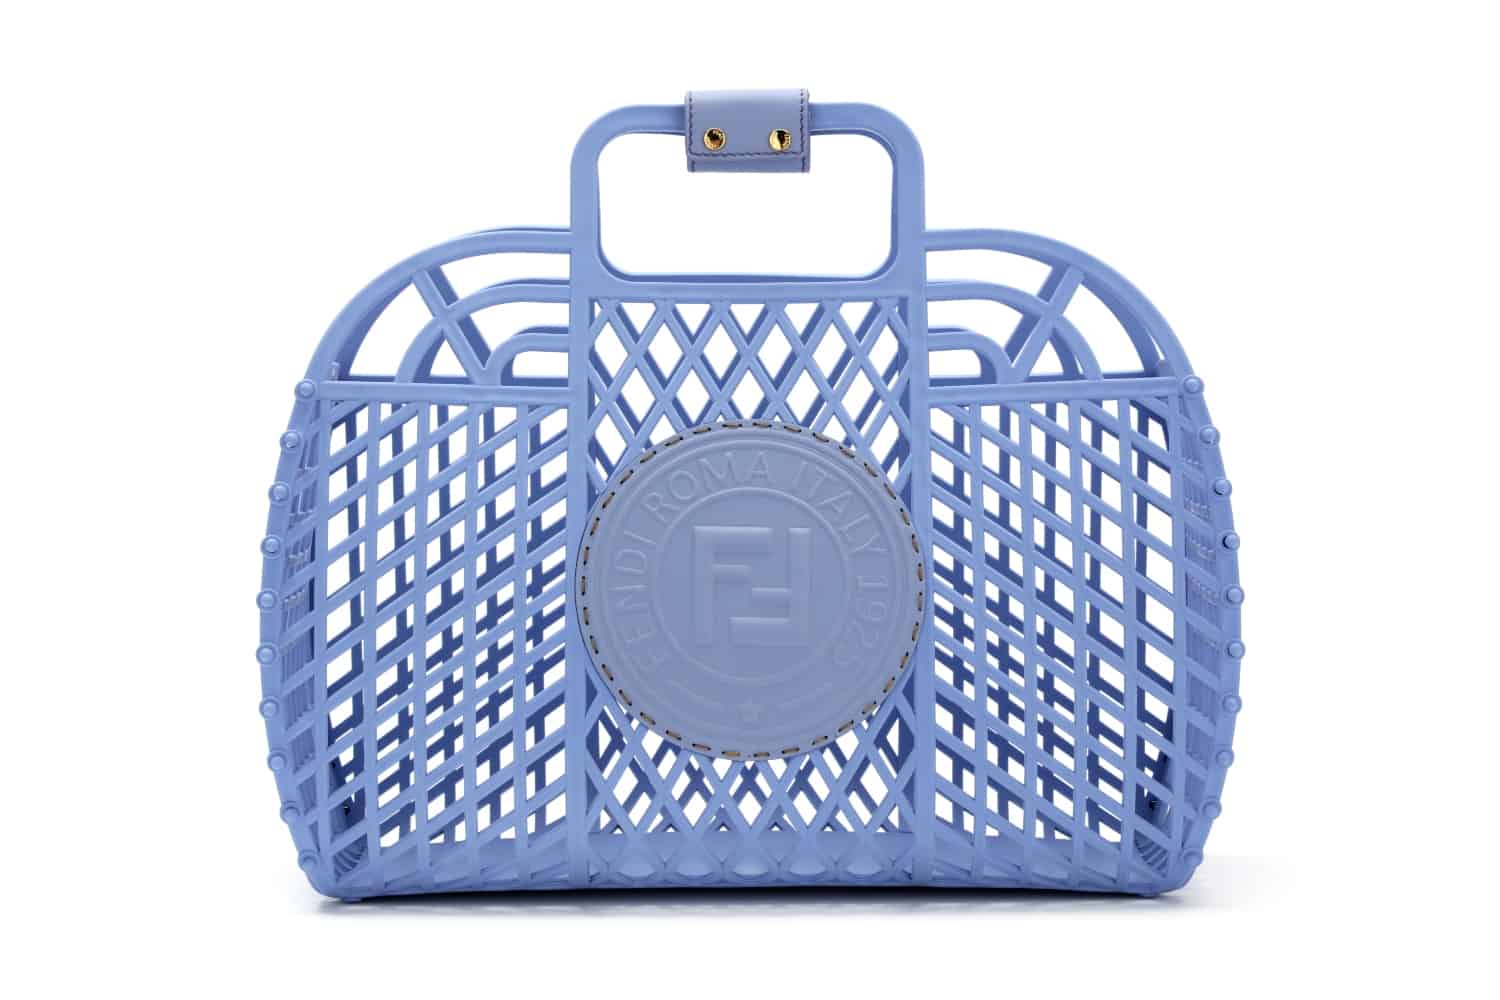 Fendi's New It Bag Will Be Everywhere Next Spring